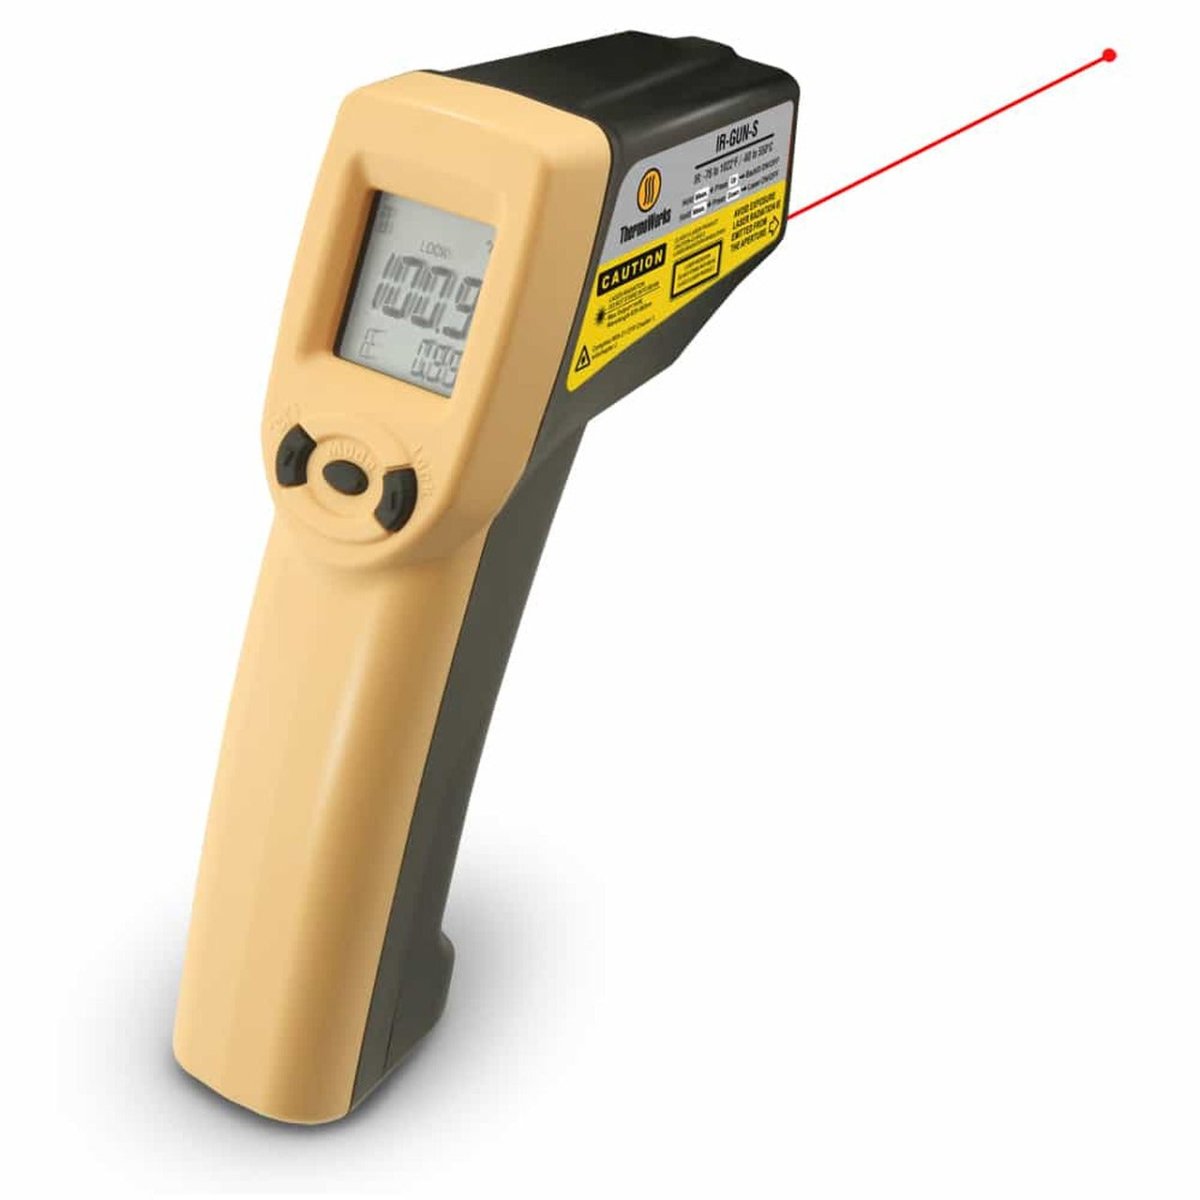 Big Green Egg Professional Infrared Cooking Surface Thermometer